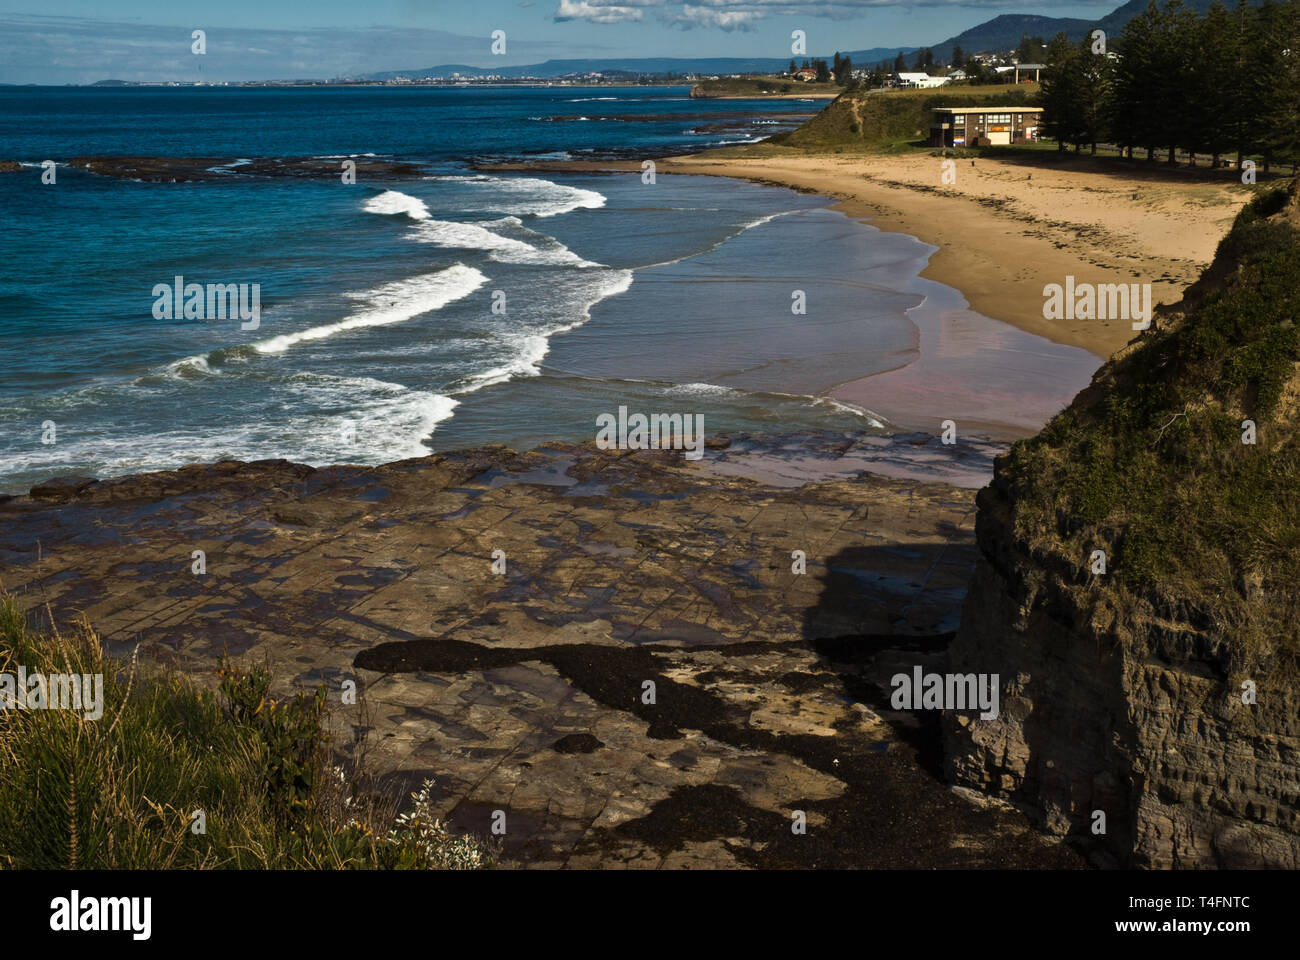 Beach at Clifton 2, Illawarra, NSW near Wollongong with Rocks in foreground. Stock Photo